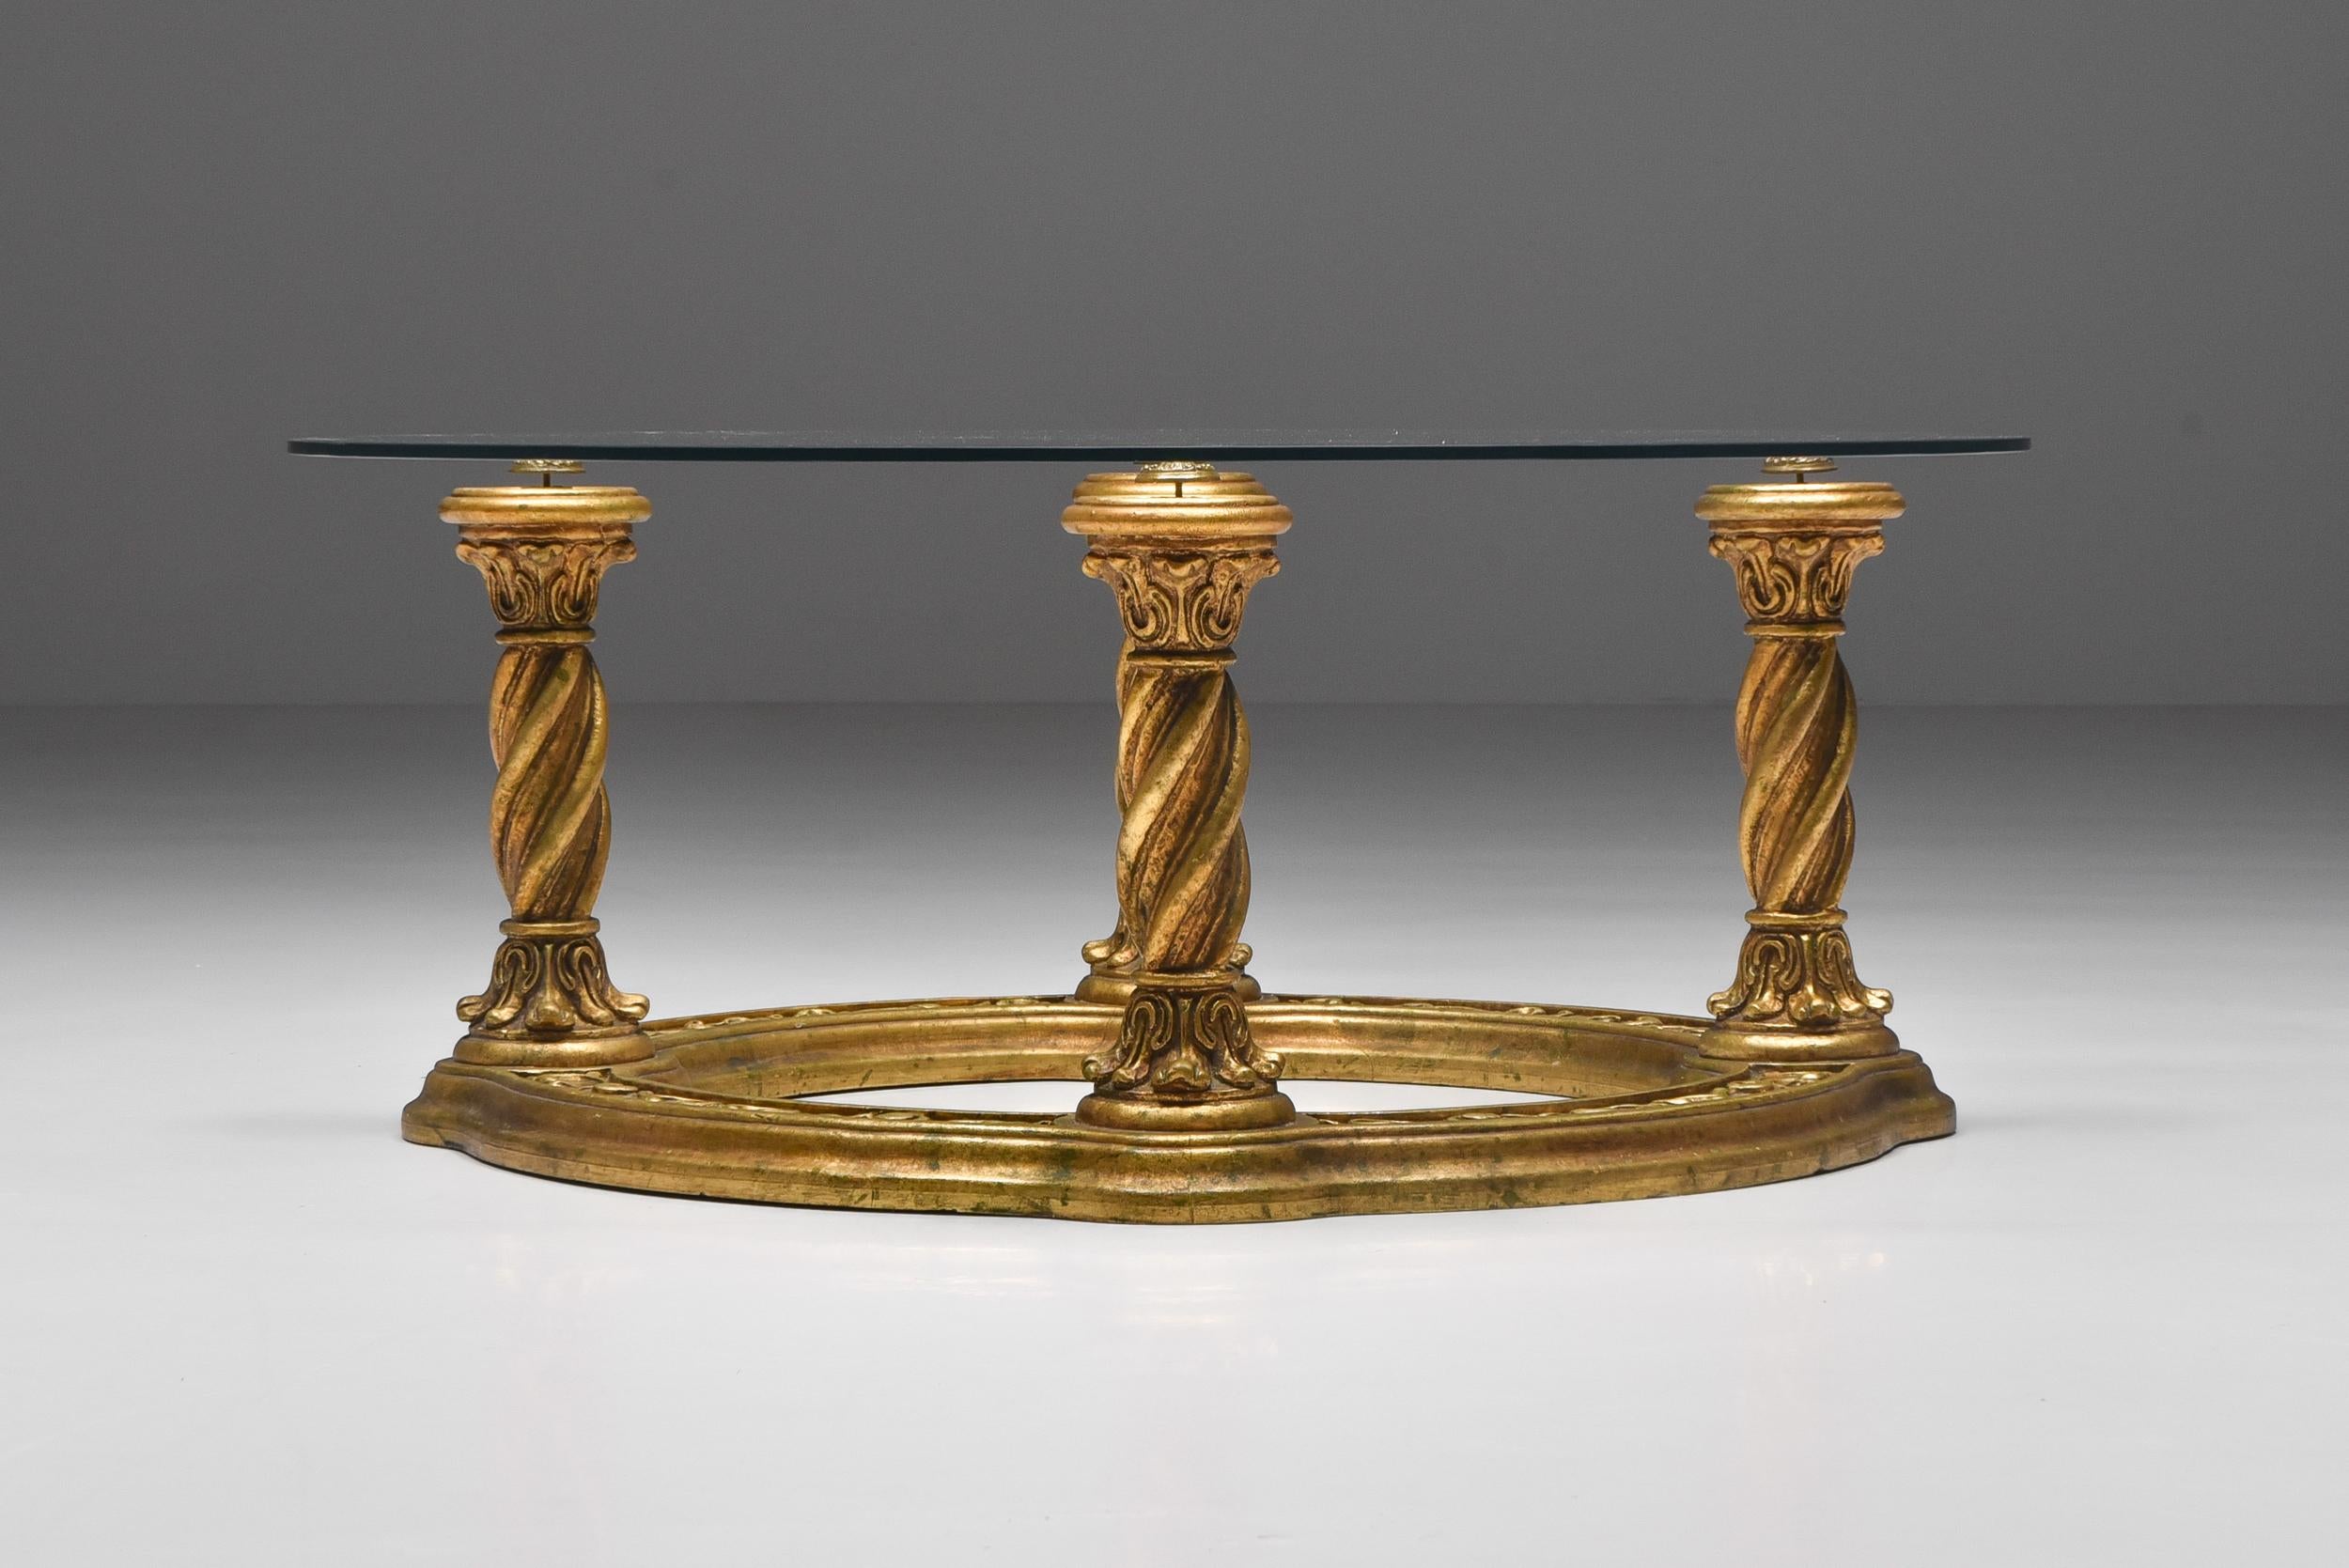 Baroque giltwood carved Regency style coffee table. Glass top with brass details, made in Belgium, the 1940s. Would look good in an eclectic interior.
 